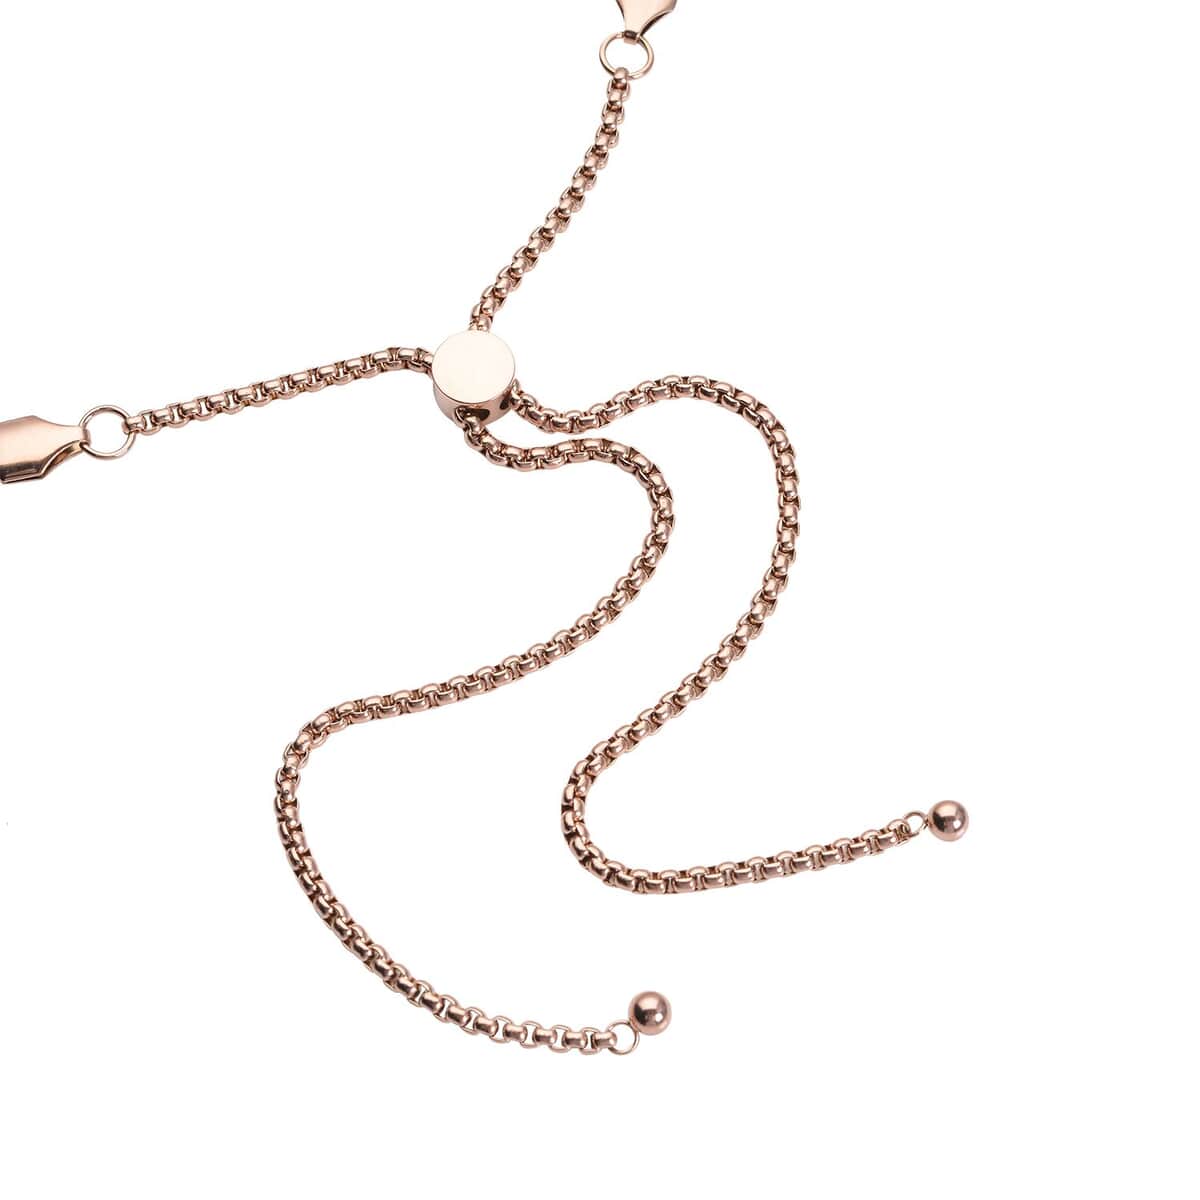 Herringbone Chain Necklace with Adjustable Ball 18-29 Inches in ION Plated RG Stainless Steel image number 3